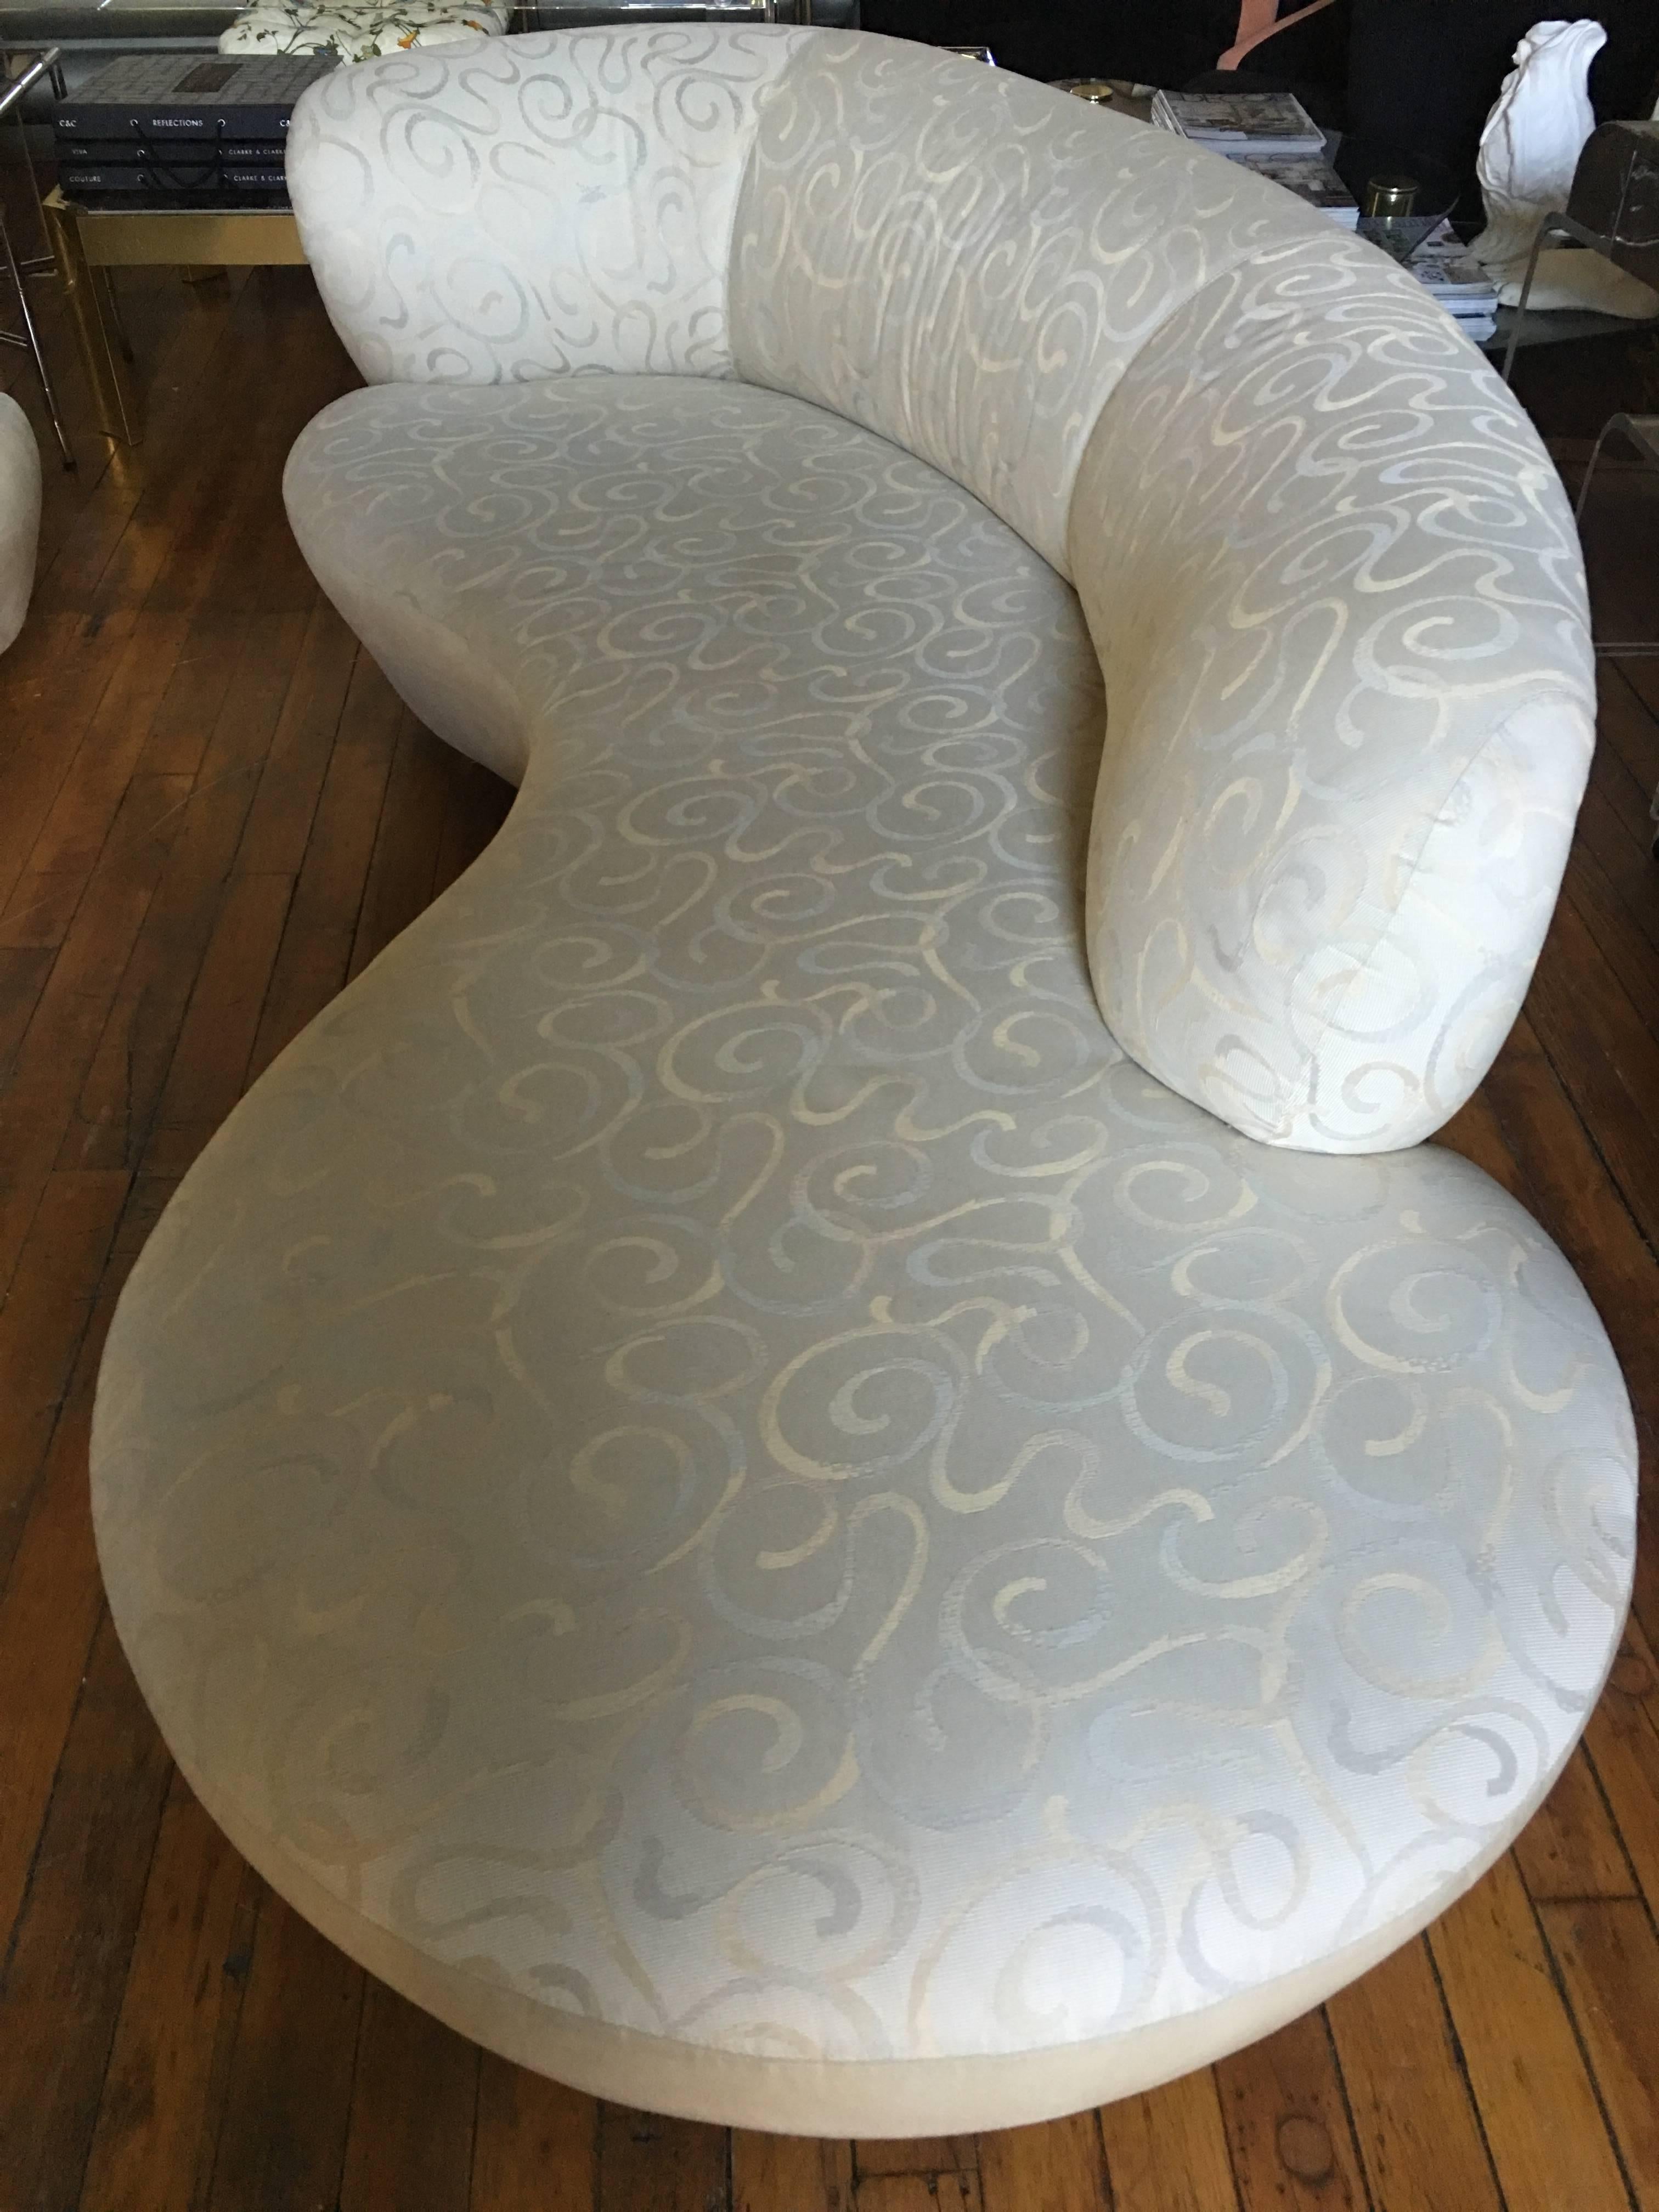 Sculptural pair of Mid-Century Modern free-form cloud curved sofas in the style of Vladimir Kagan for Weiman Preview. Pair includes one right arm and one left arm sofa. Original upholstery featuring neutral cream ultra-suede backs and fronts with